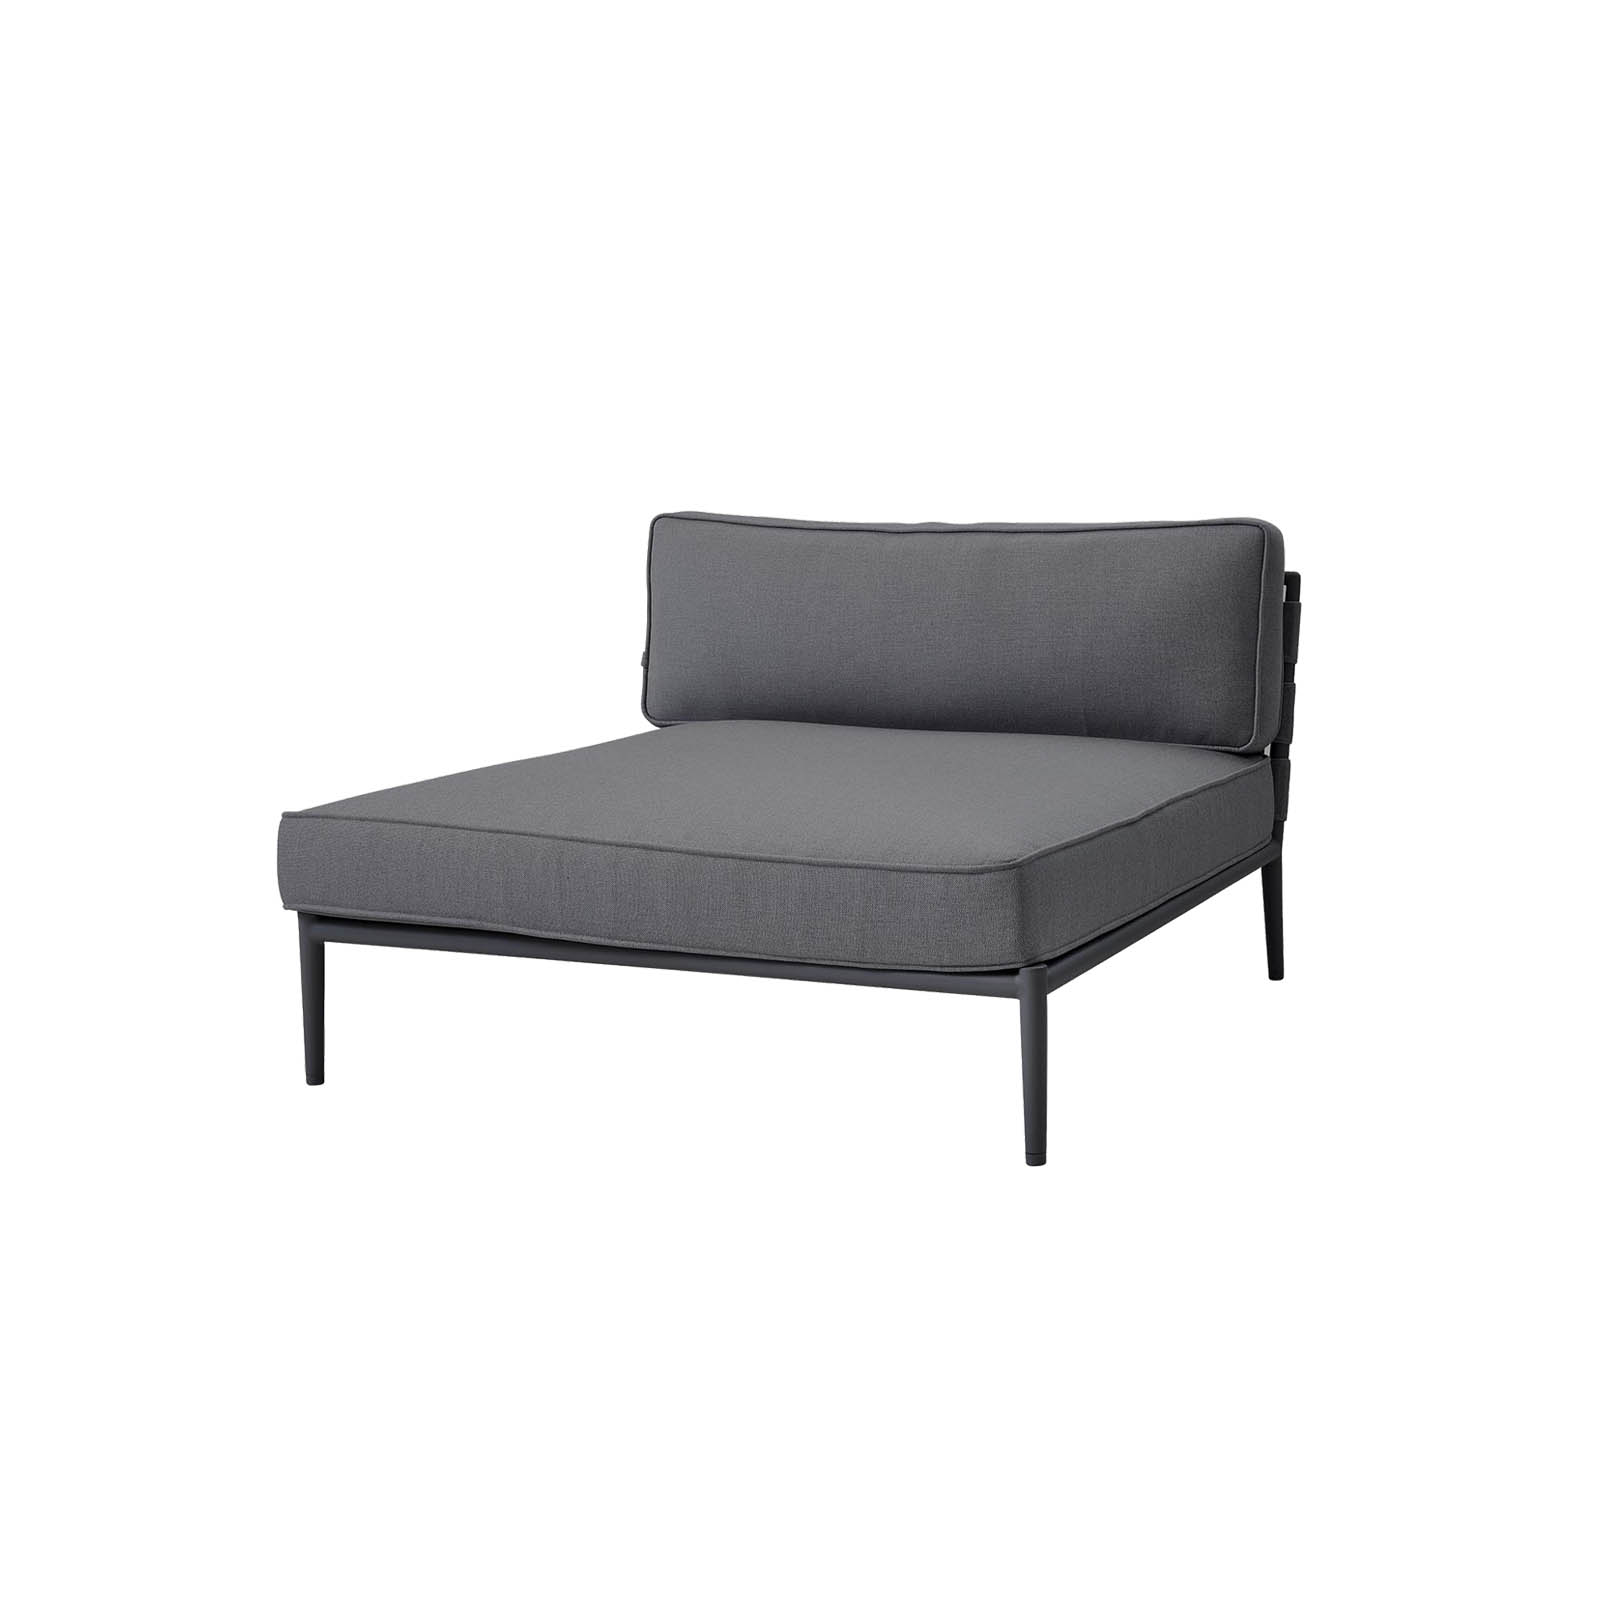 Conic daybed module aus Cane-line AirTouch mit QuickDry in Grey